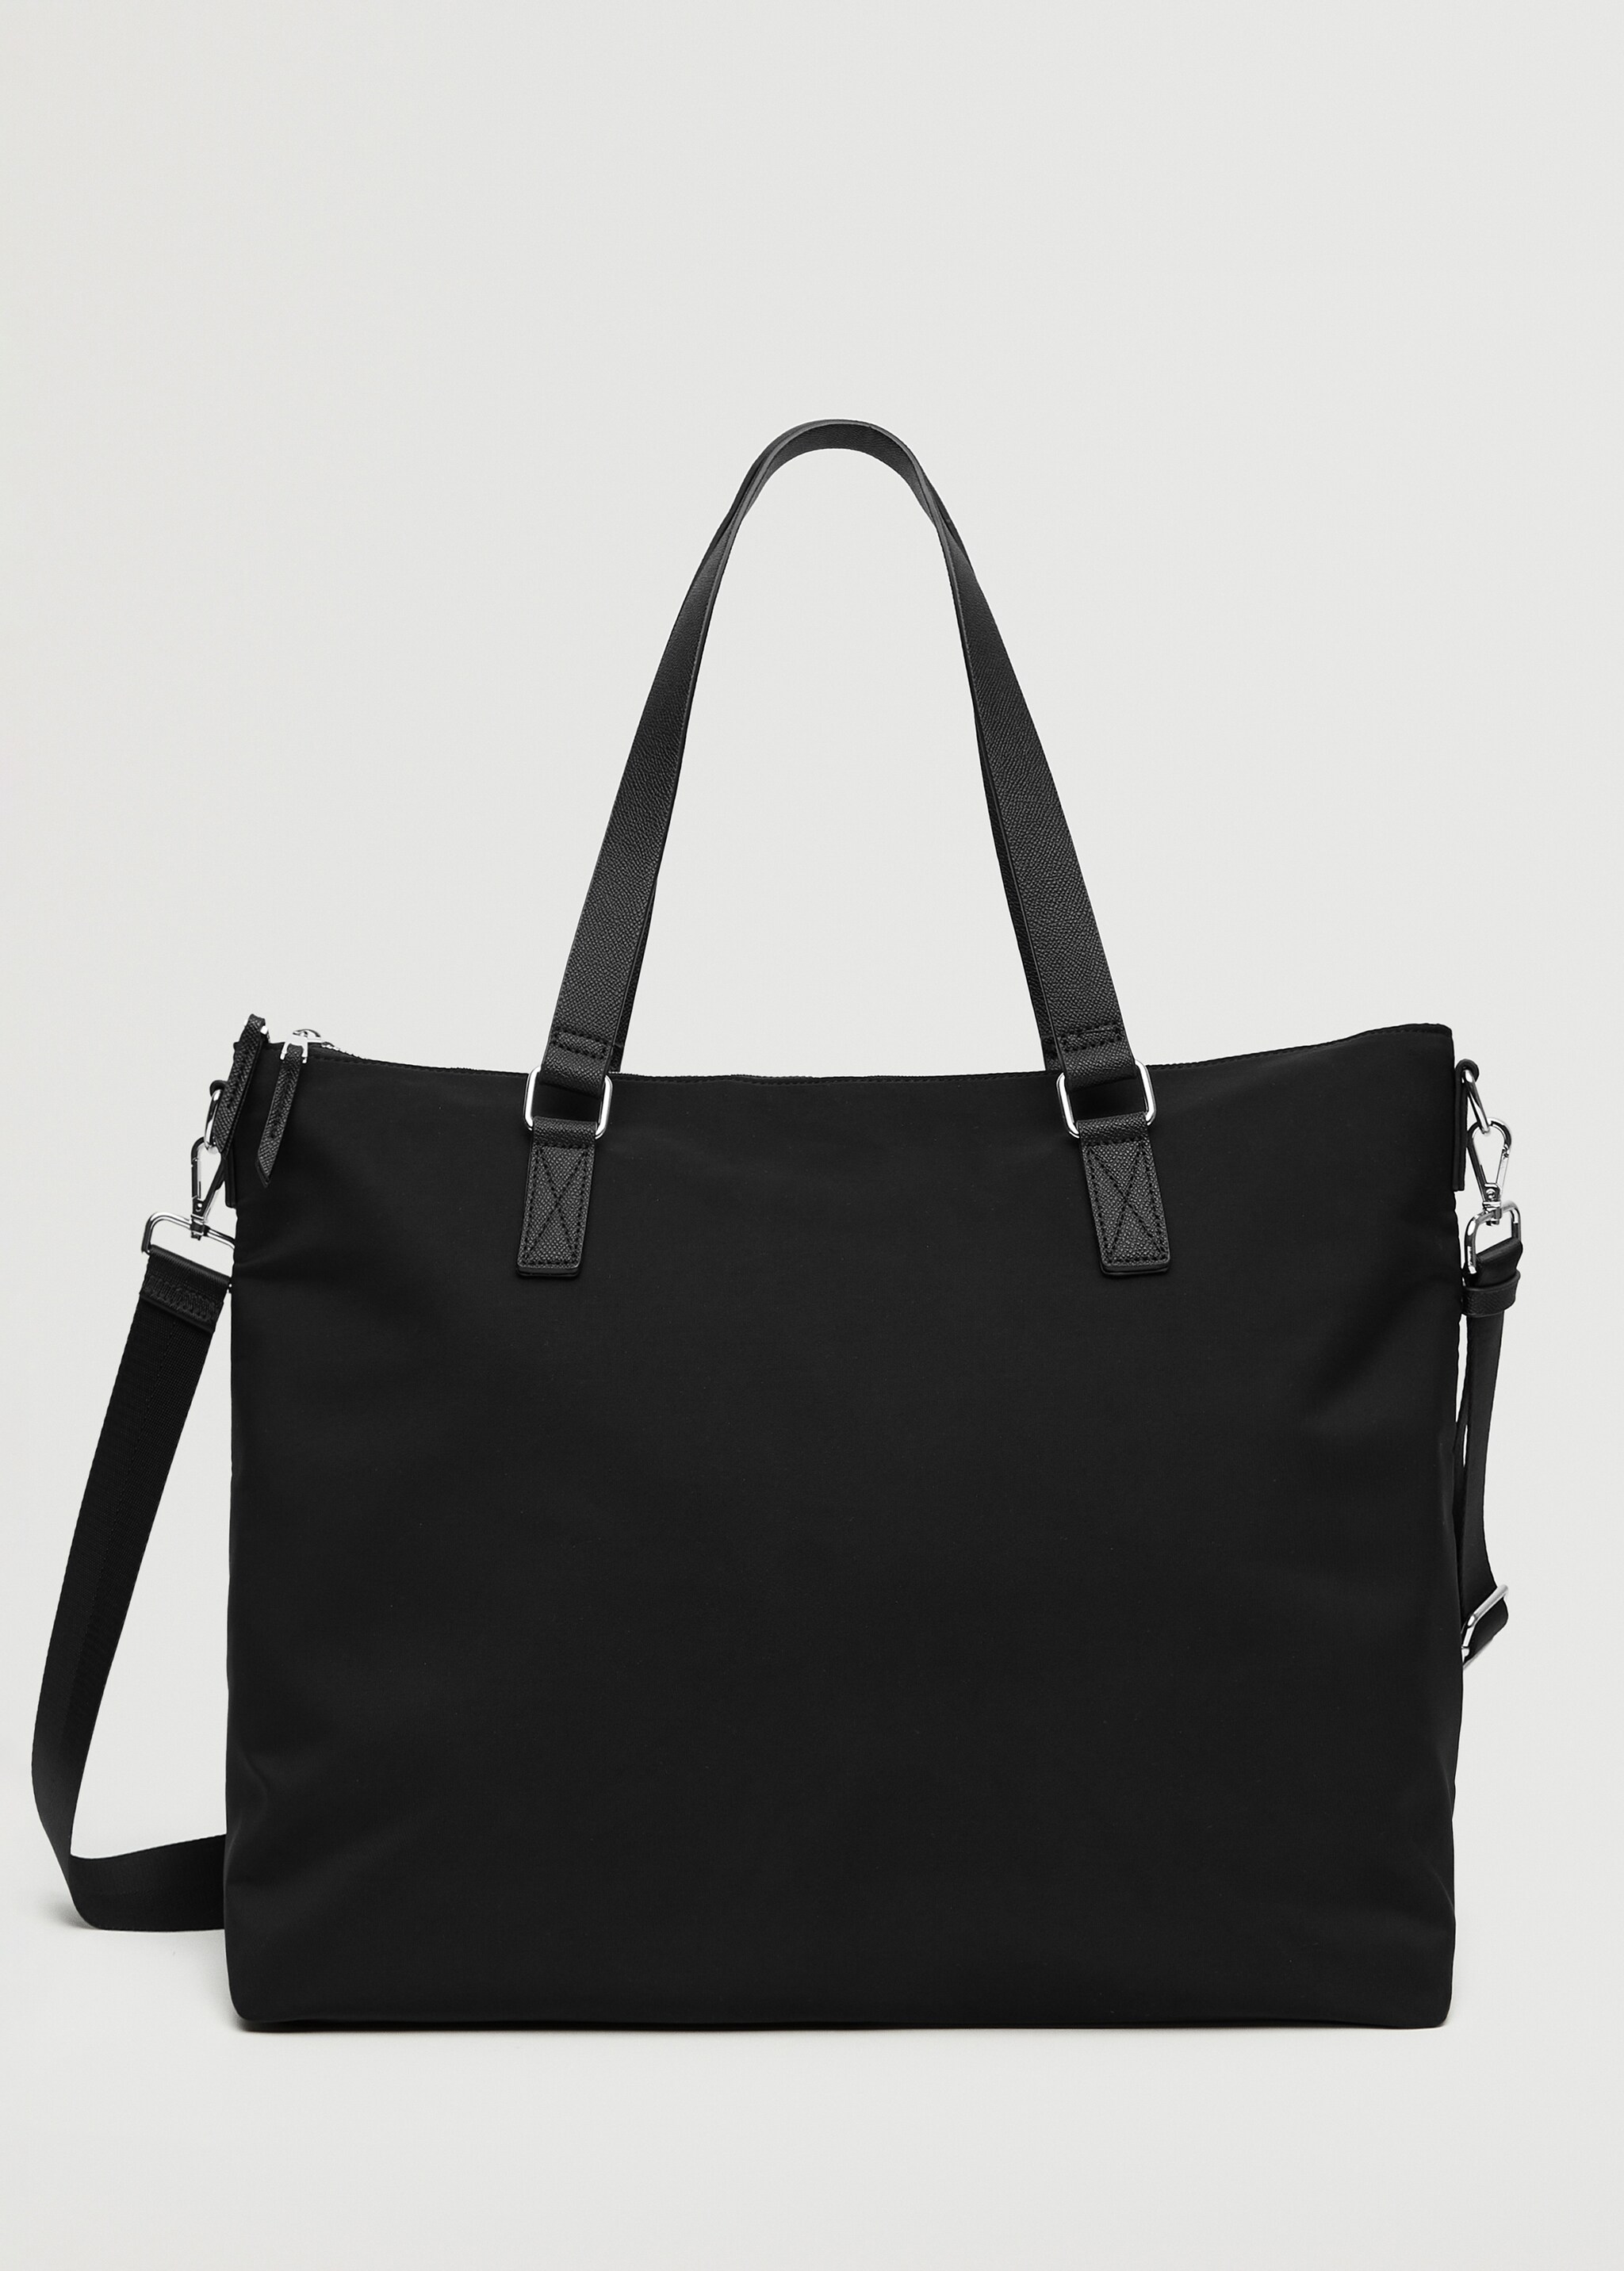 Nylon tote bag - Article without model